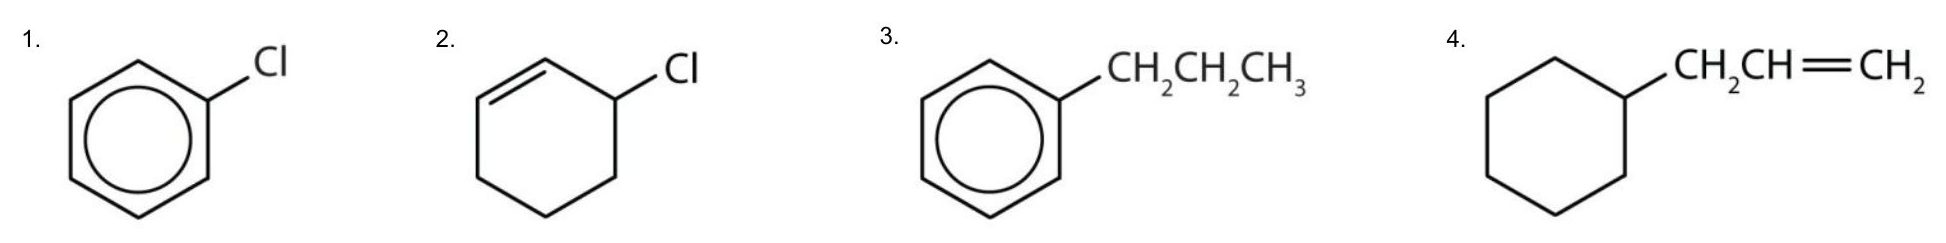 There are 4 images from left to right: a chlorobenzene; 2-chlorocyclohexene; a propylbenzene; and lastly 3-phenyl-1-propene.